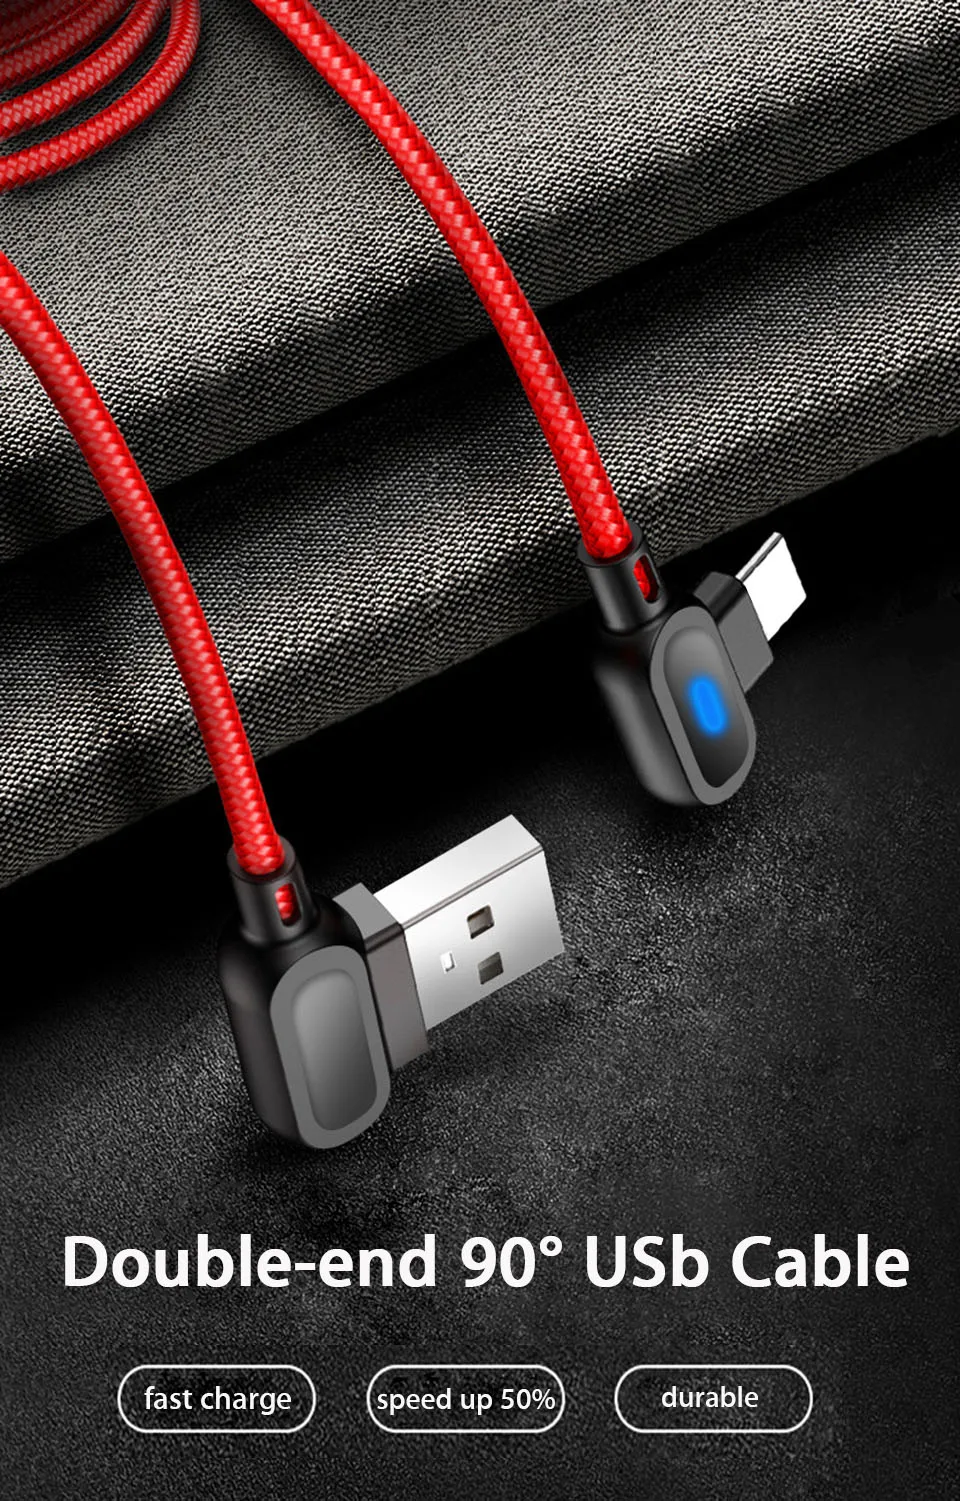 Usb Type C 90 Degree Cable Fast Charging Phone Charge Cavo Usb Charger Wire 2 Meter for Samsung Note 9 8 A20e Redmi K20 Pro Sony